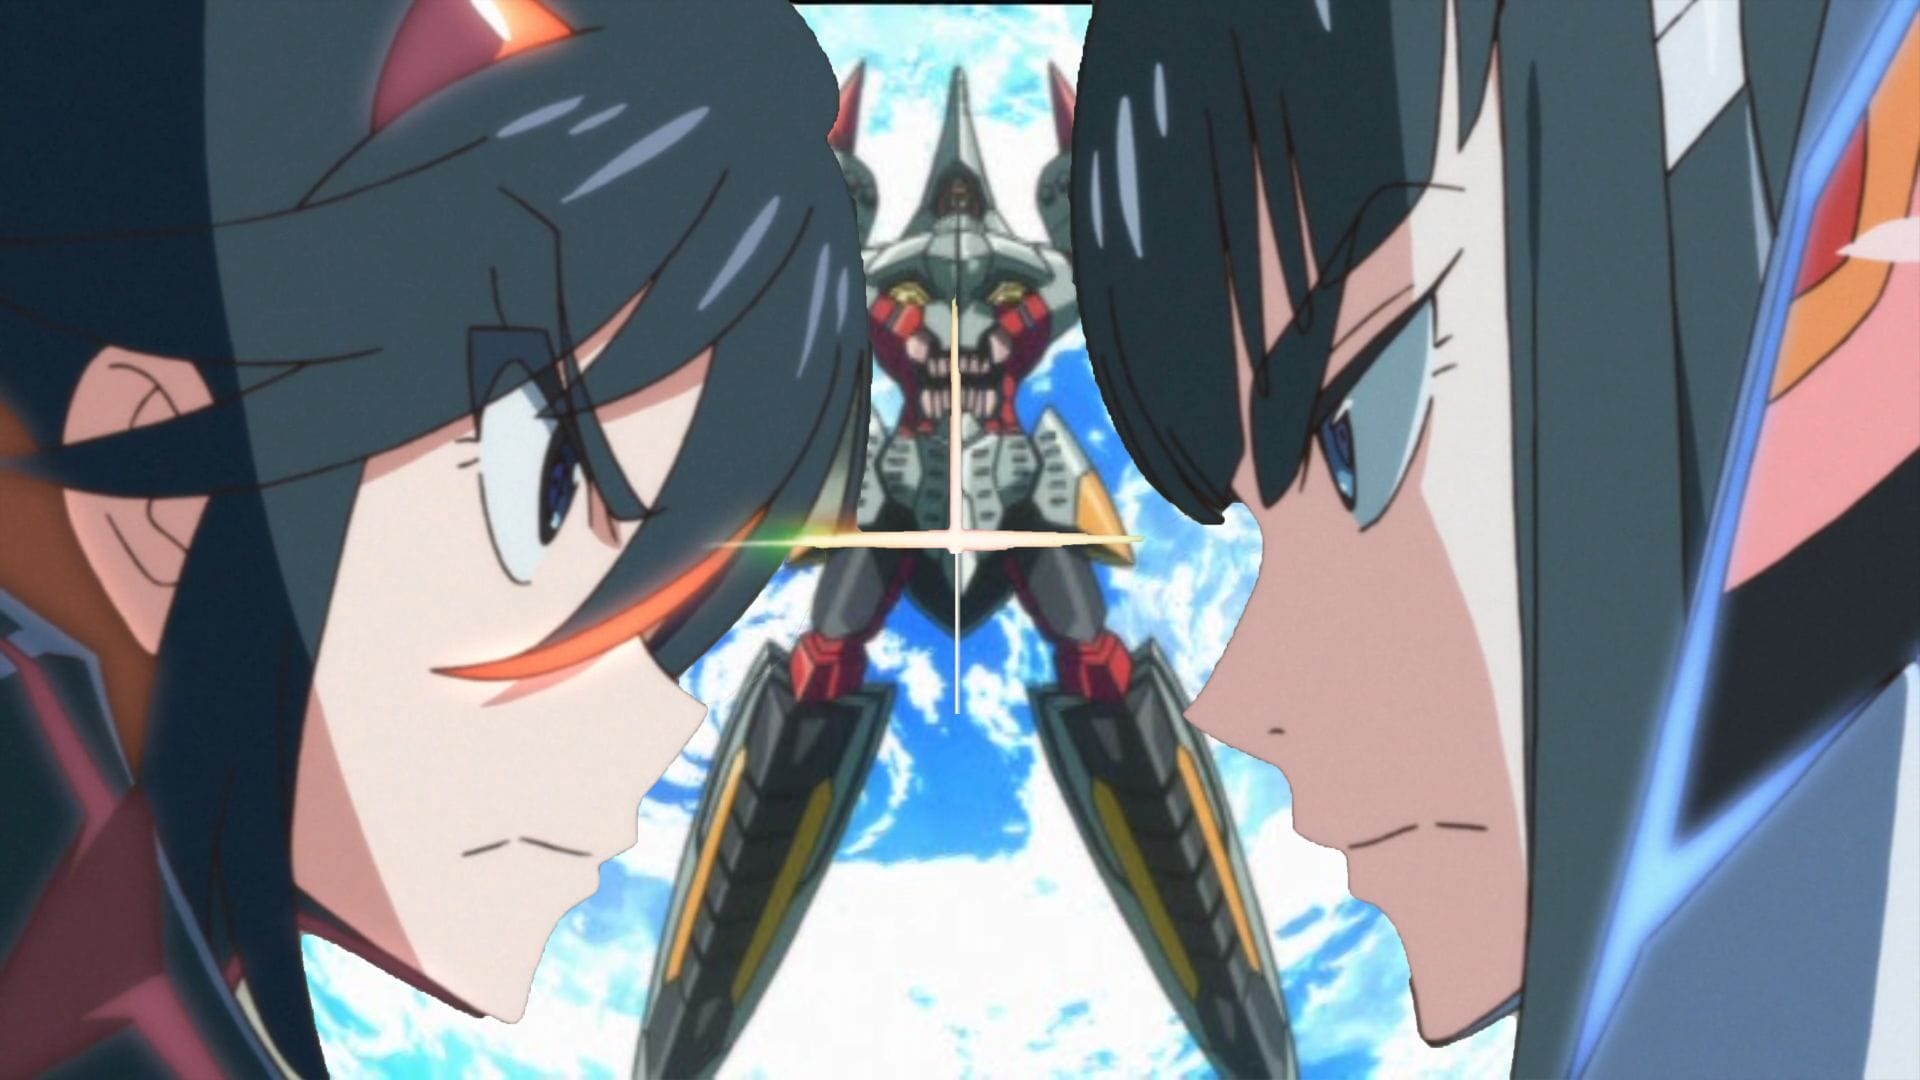 Gurren Lagann announces new project with key visual